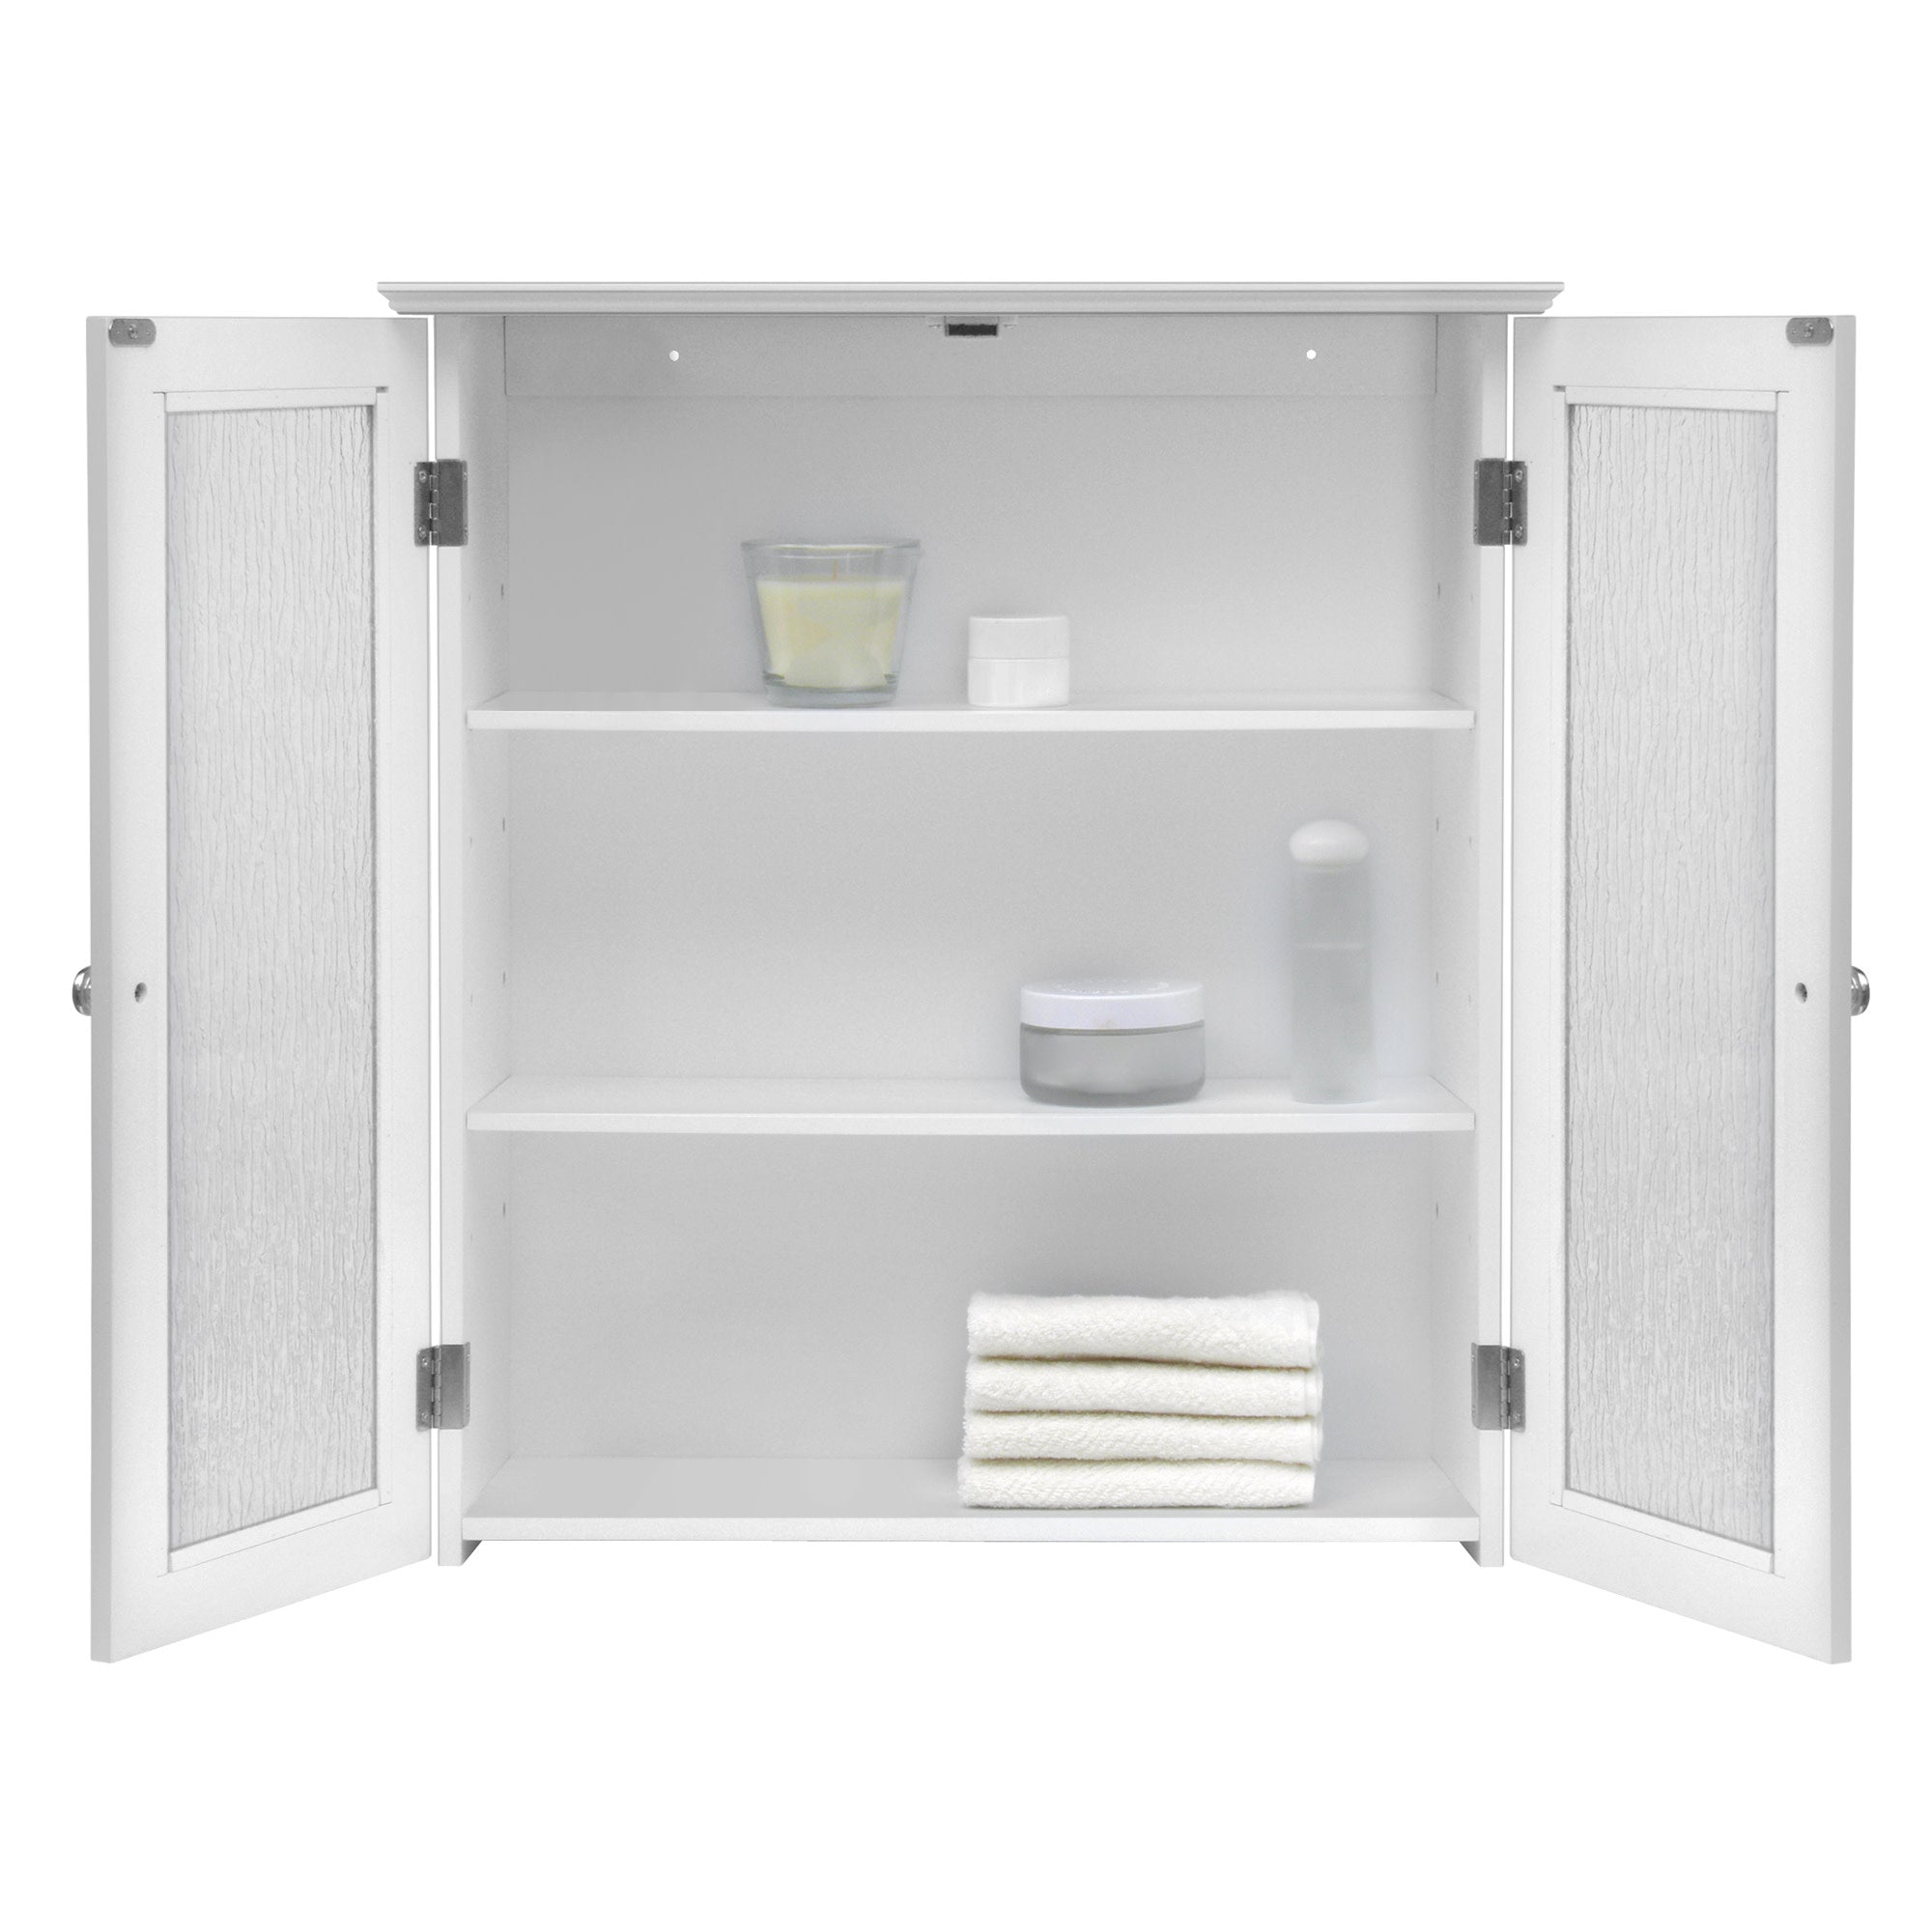 Elegant Home Fashions Connor Removable Wall Cabinet with 2 Glass Doors